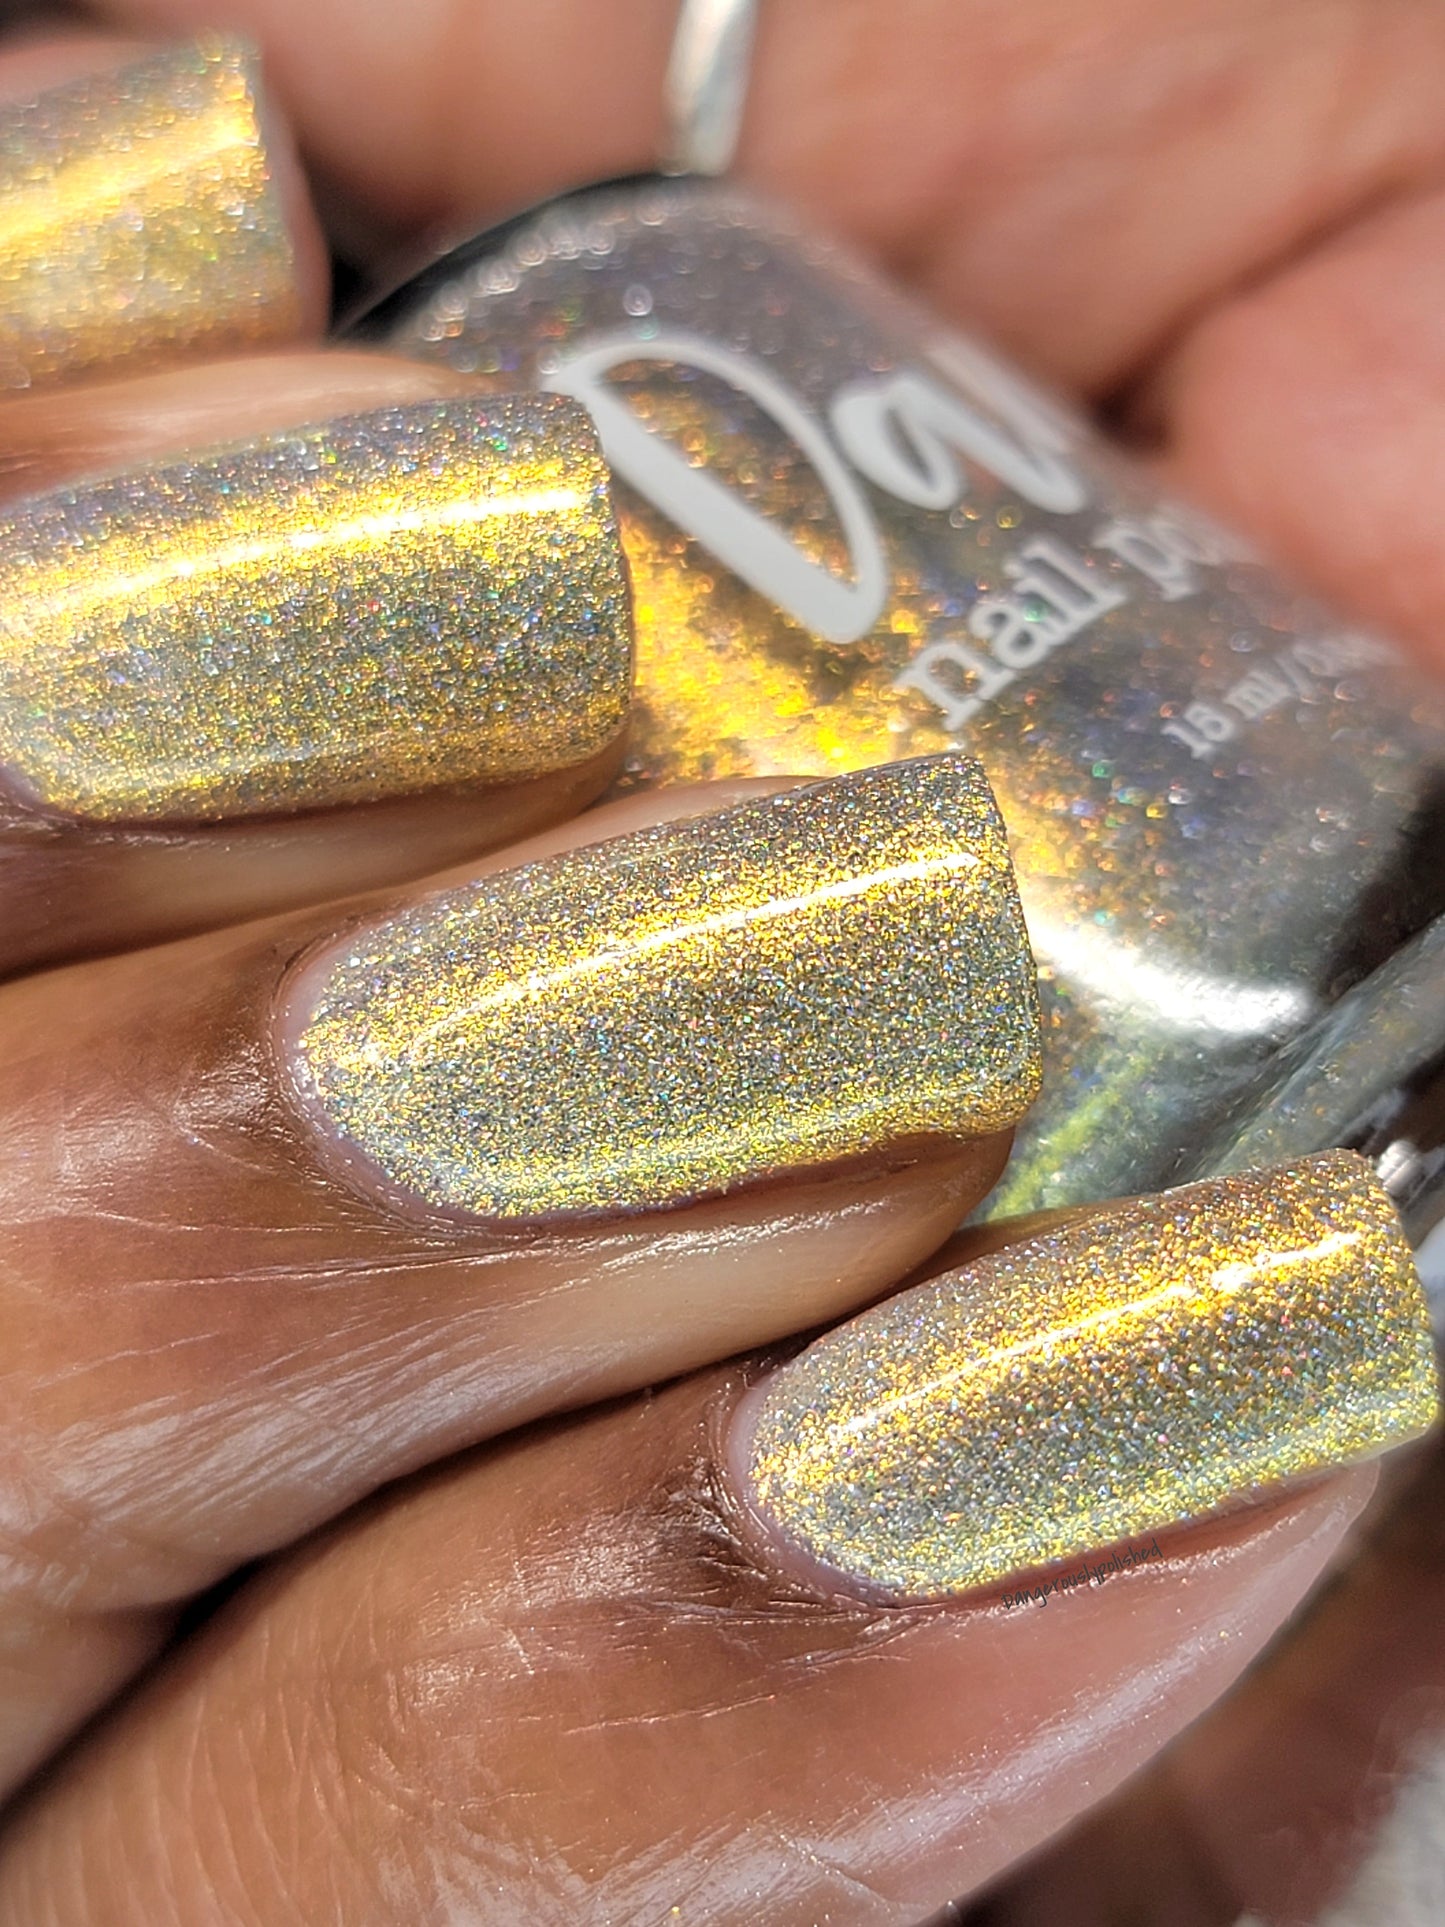 Take That Risk - Yellow Gold Shimmer - Silver Reflective Glitter Nail Polish - Life is Short Collection